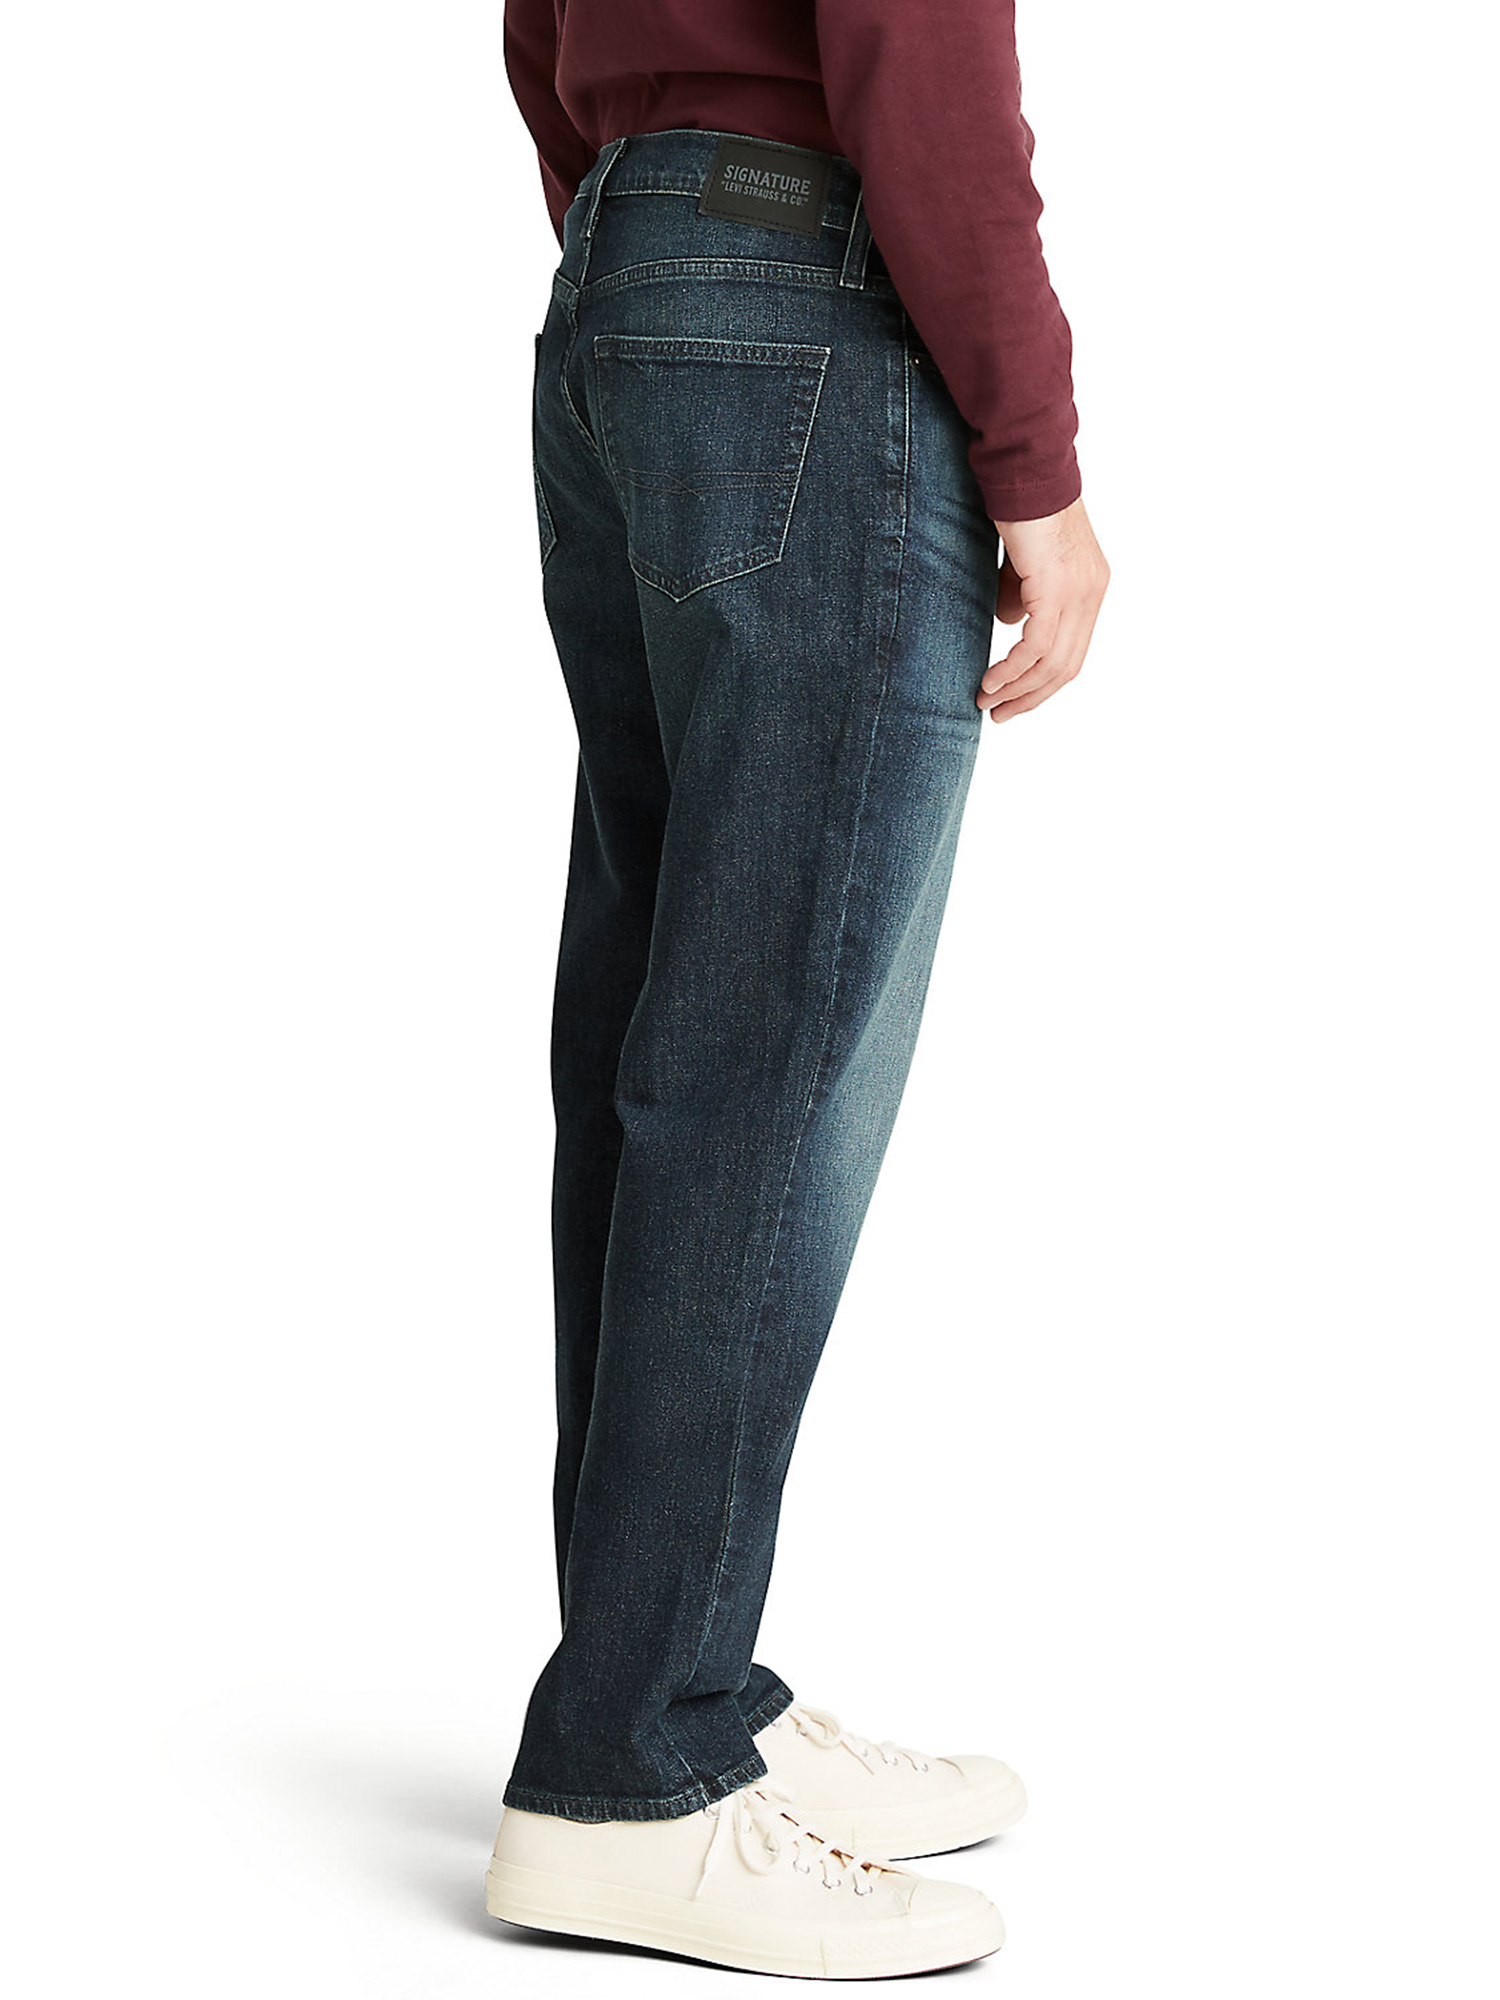 Signature by Levi Strauss & Co. Men's and Big and Tall Athletic Fit Jeans - image 5 of 7